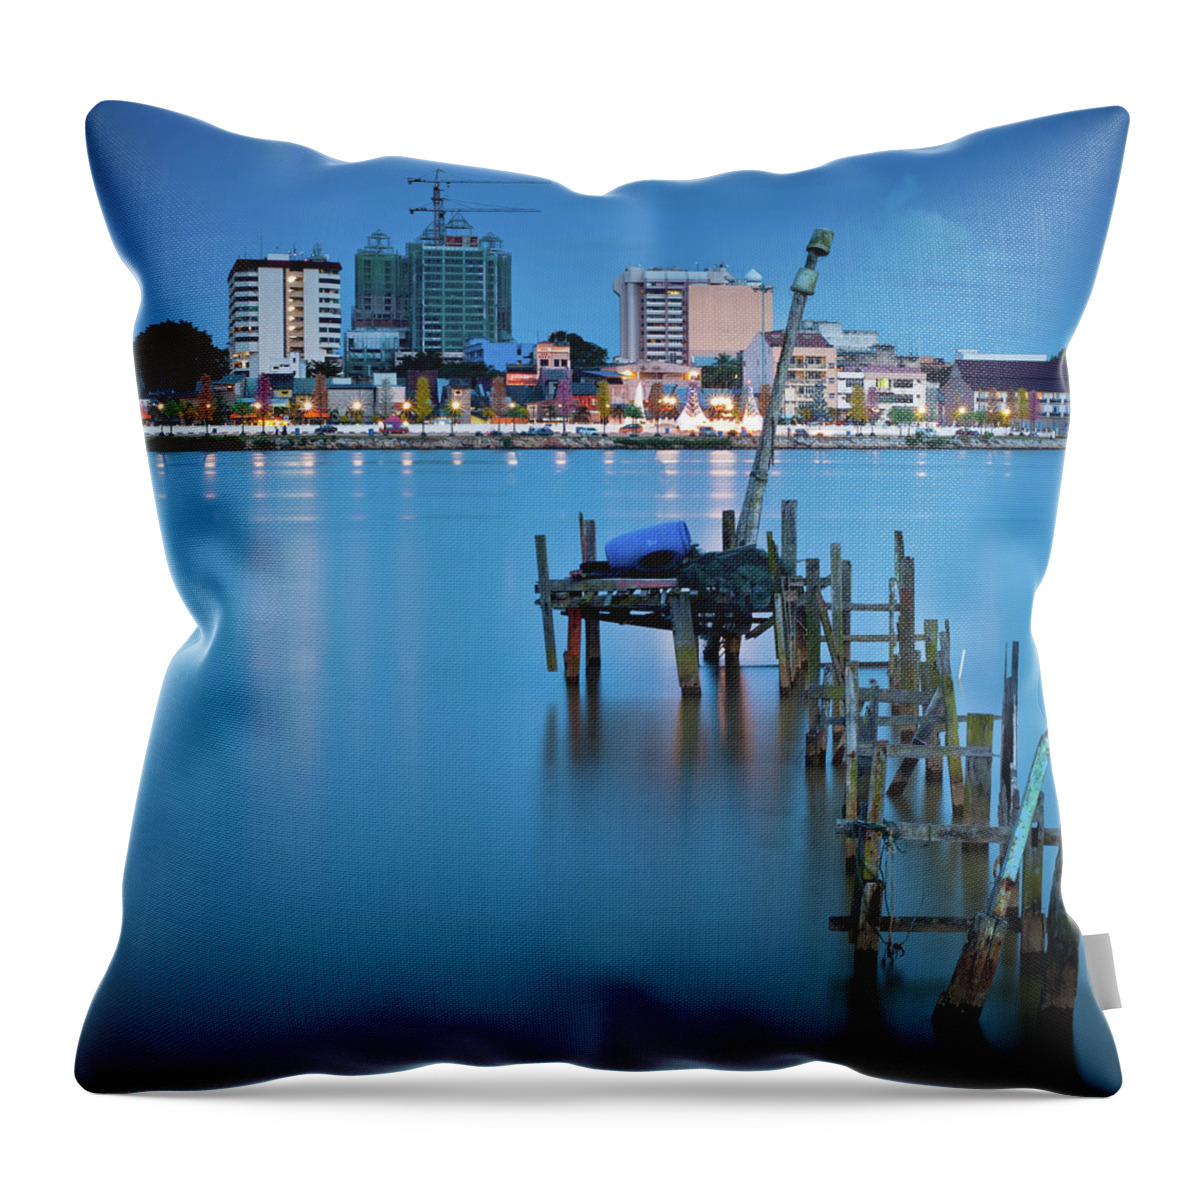 Tranquility Throw Pillow featuring the photograph Broken Jetty At Blue Hours by Www.imagesbyhafiz.com